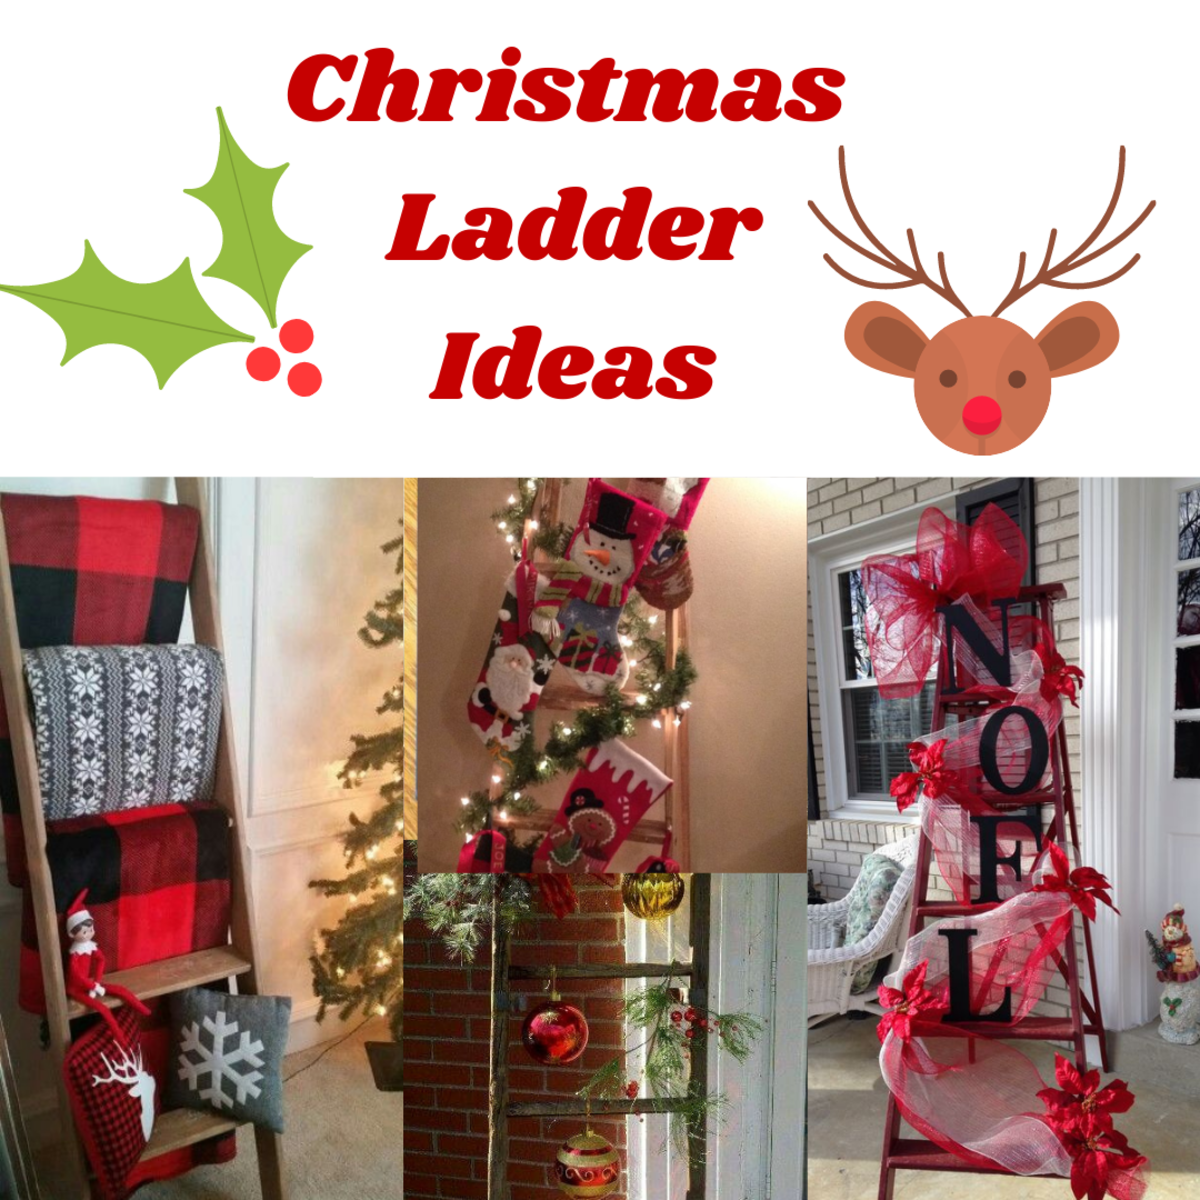 30+ DIY Christmas Ladders Ideas to Turn Your Home Into a Winter Wonderland